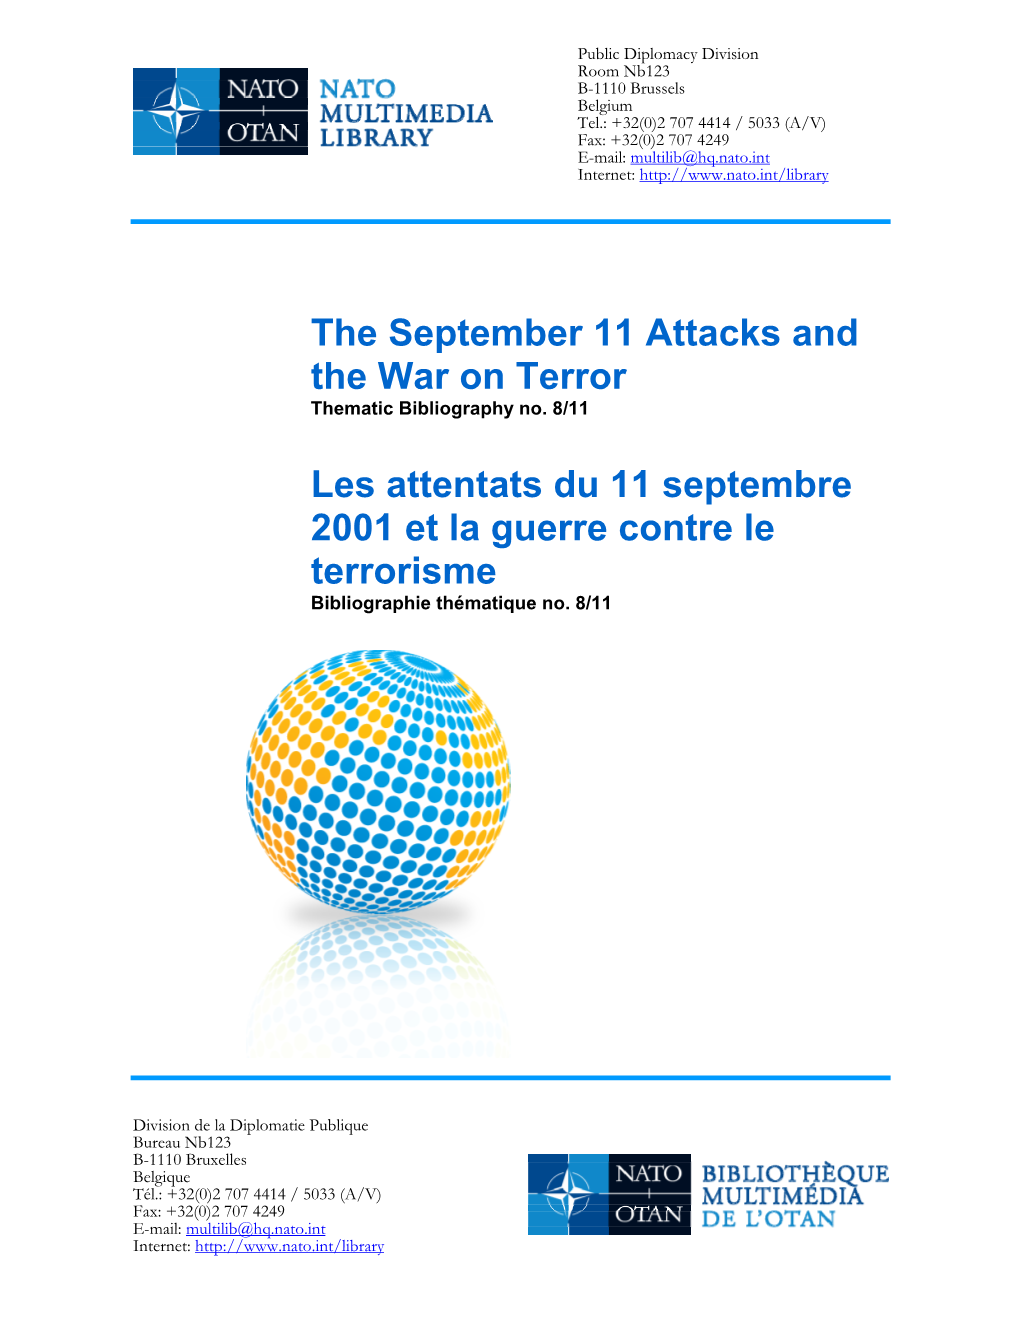 The September 11 Attacks and the War on Terror Thematic Bibliography No